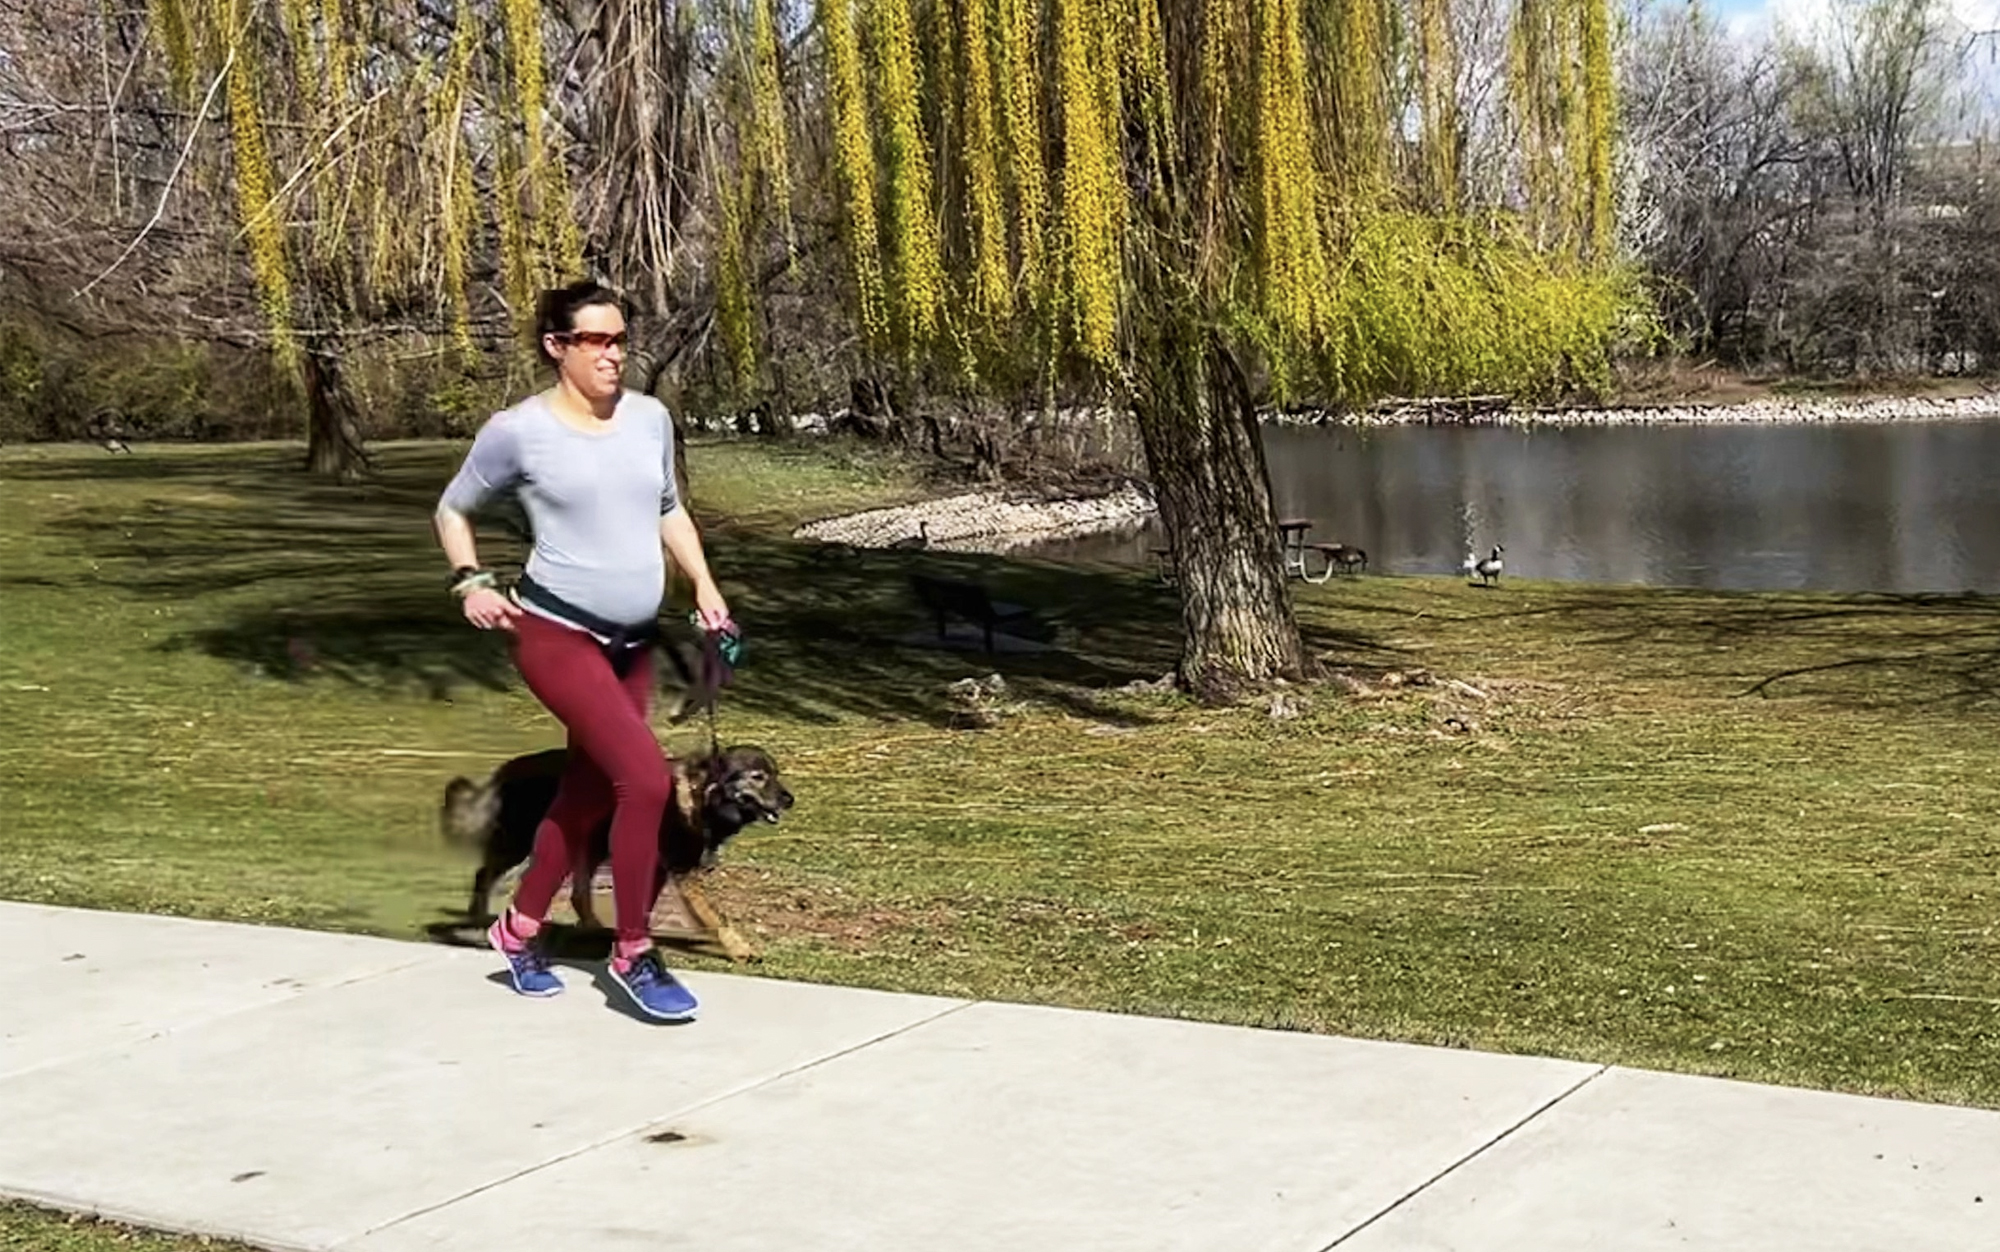 Pregnant woman running in barefoot shoes.